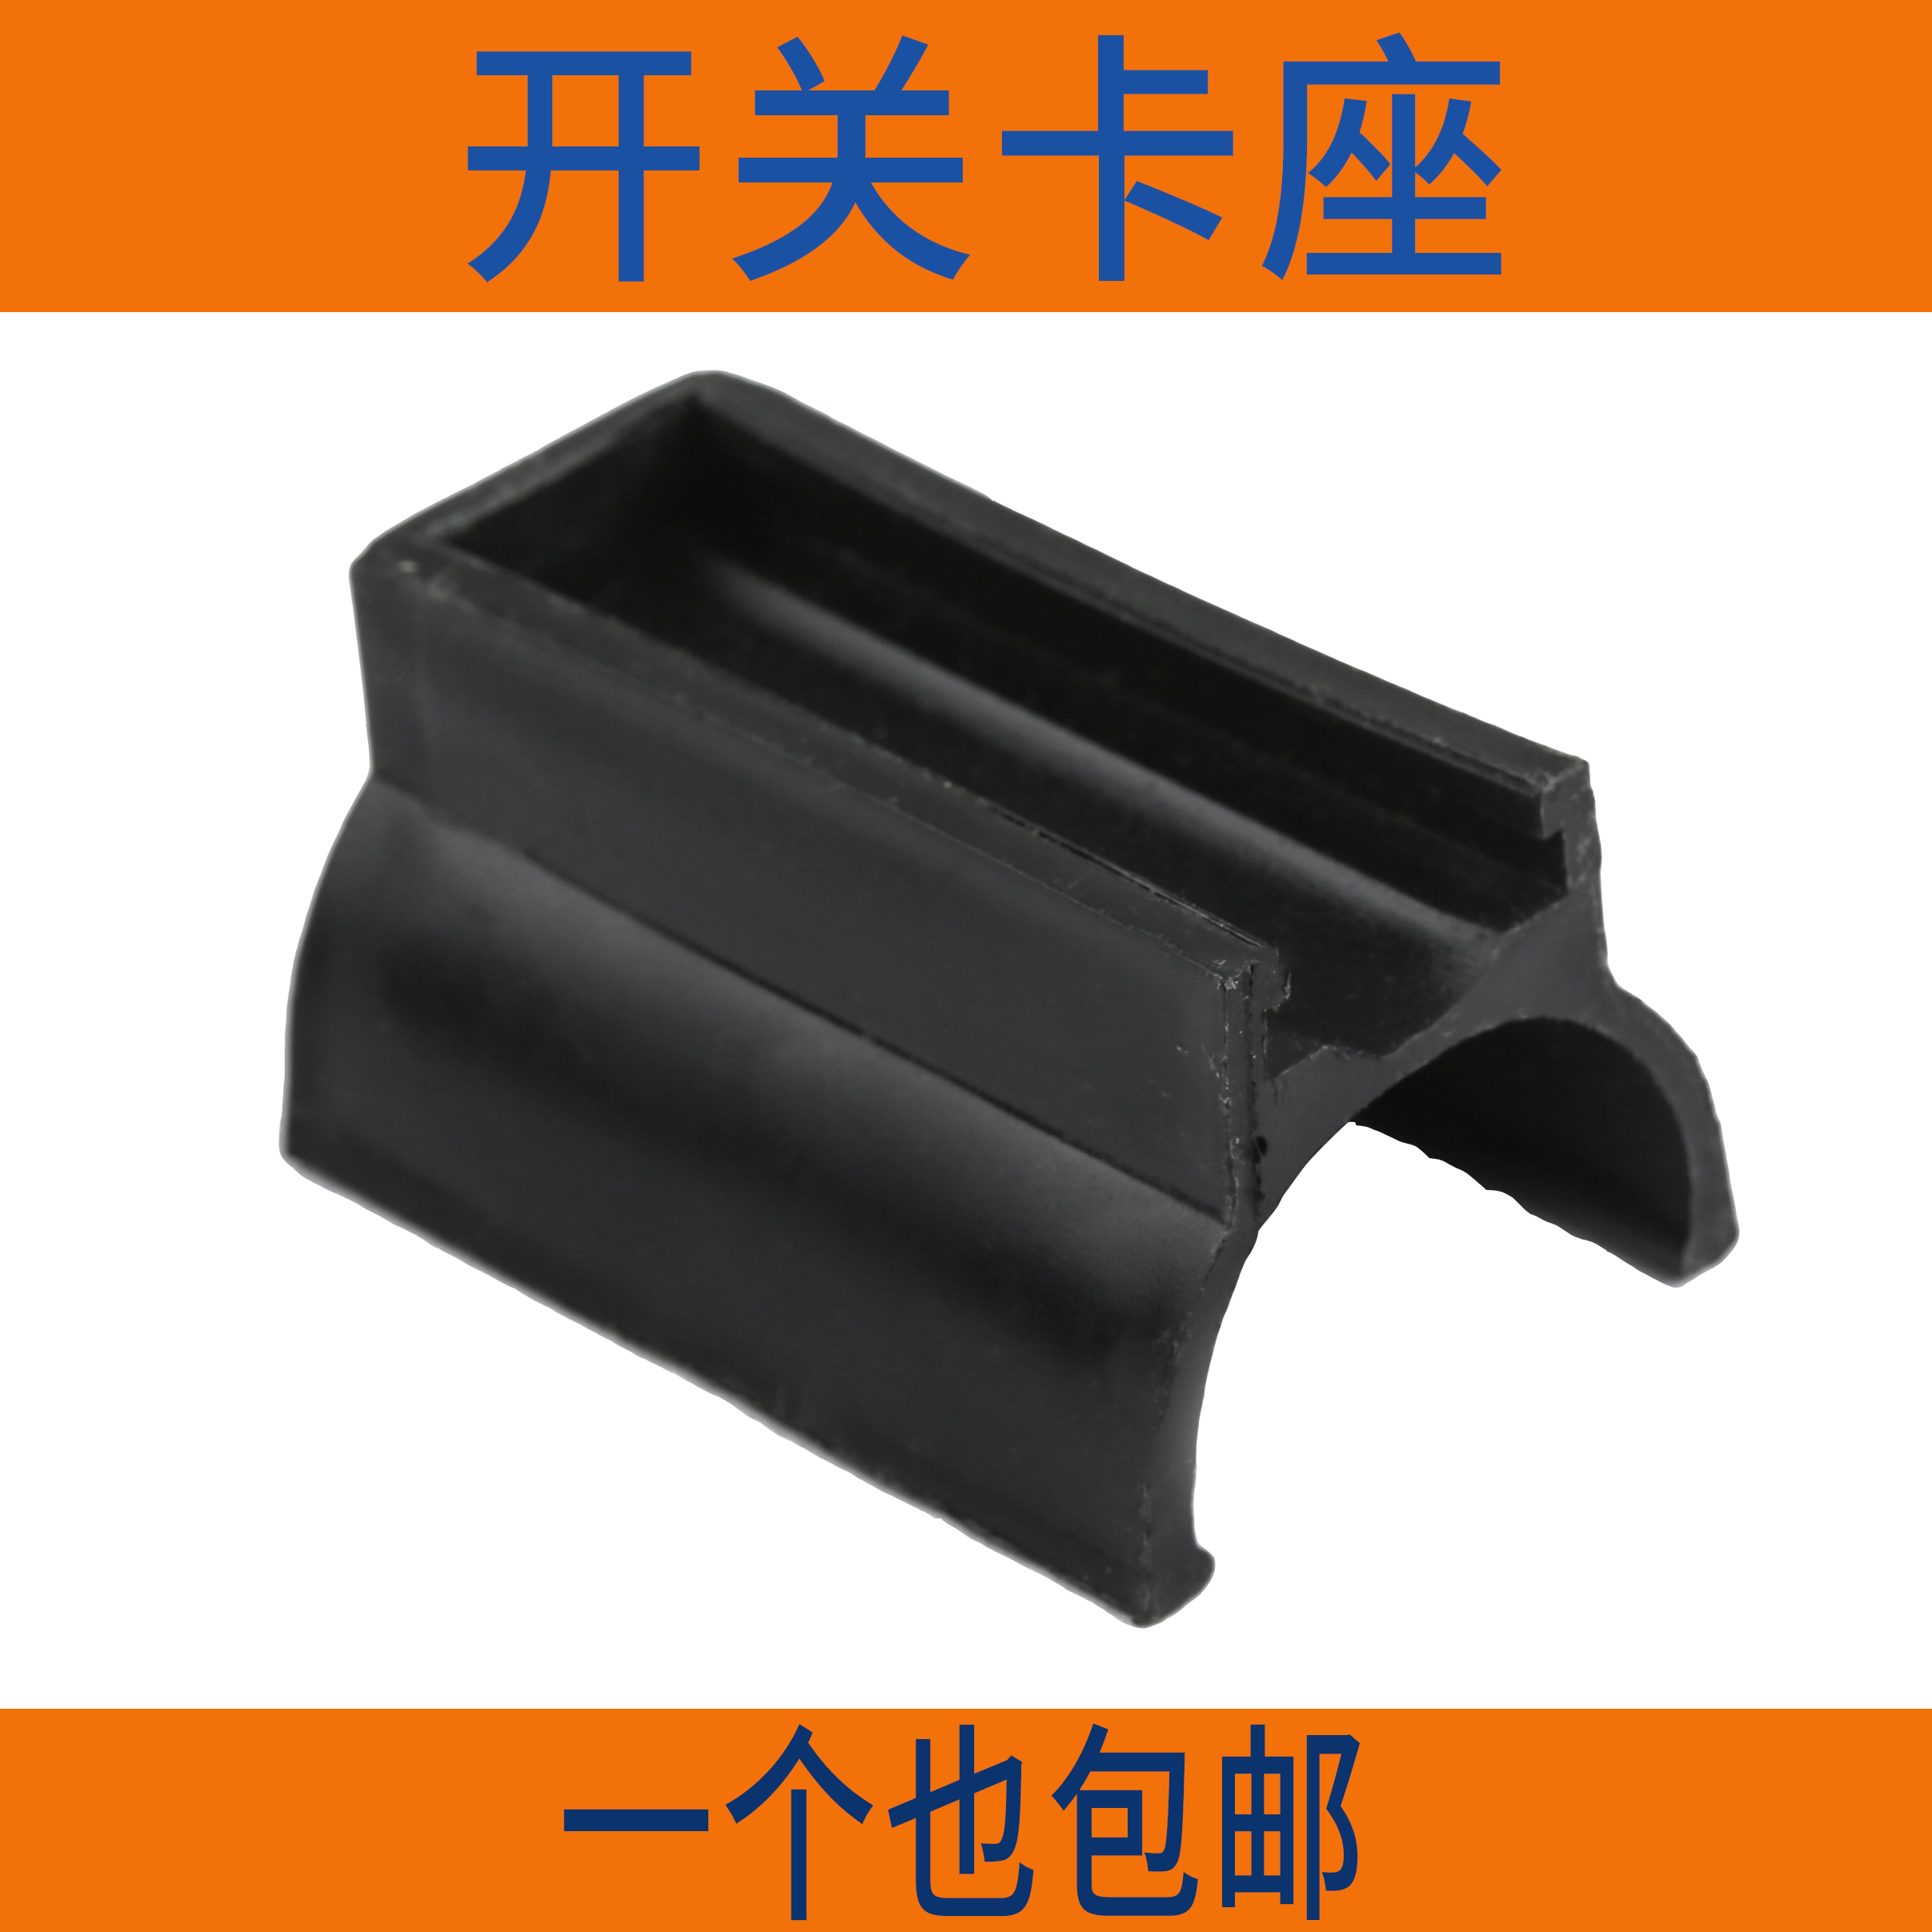 Hand press switch cassette inverter switch cassette telescopic lever holder convenient and durable hand pinch switch cassette bag